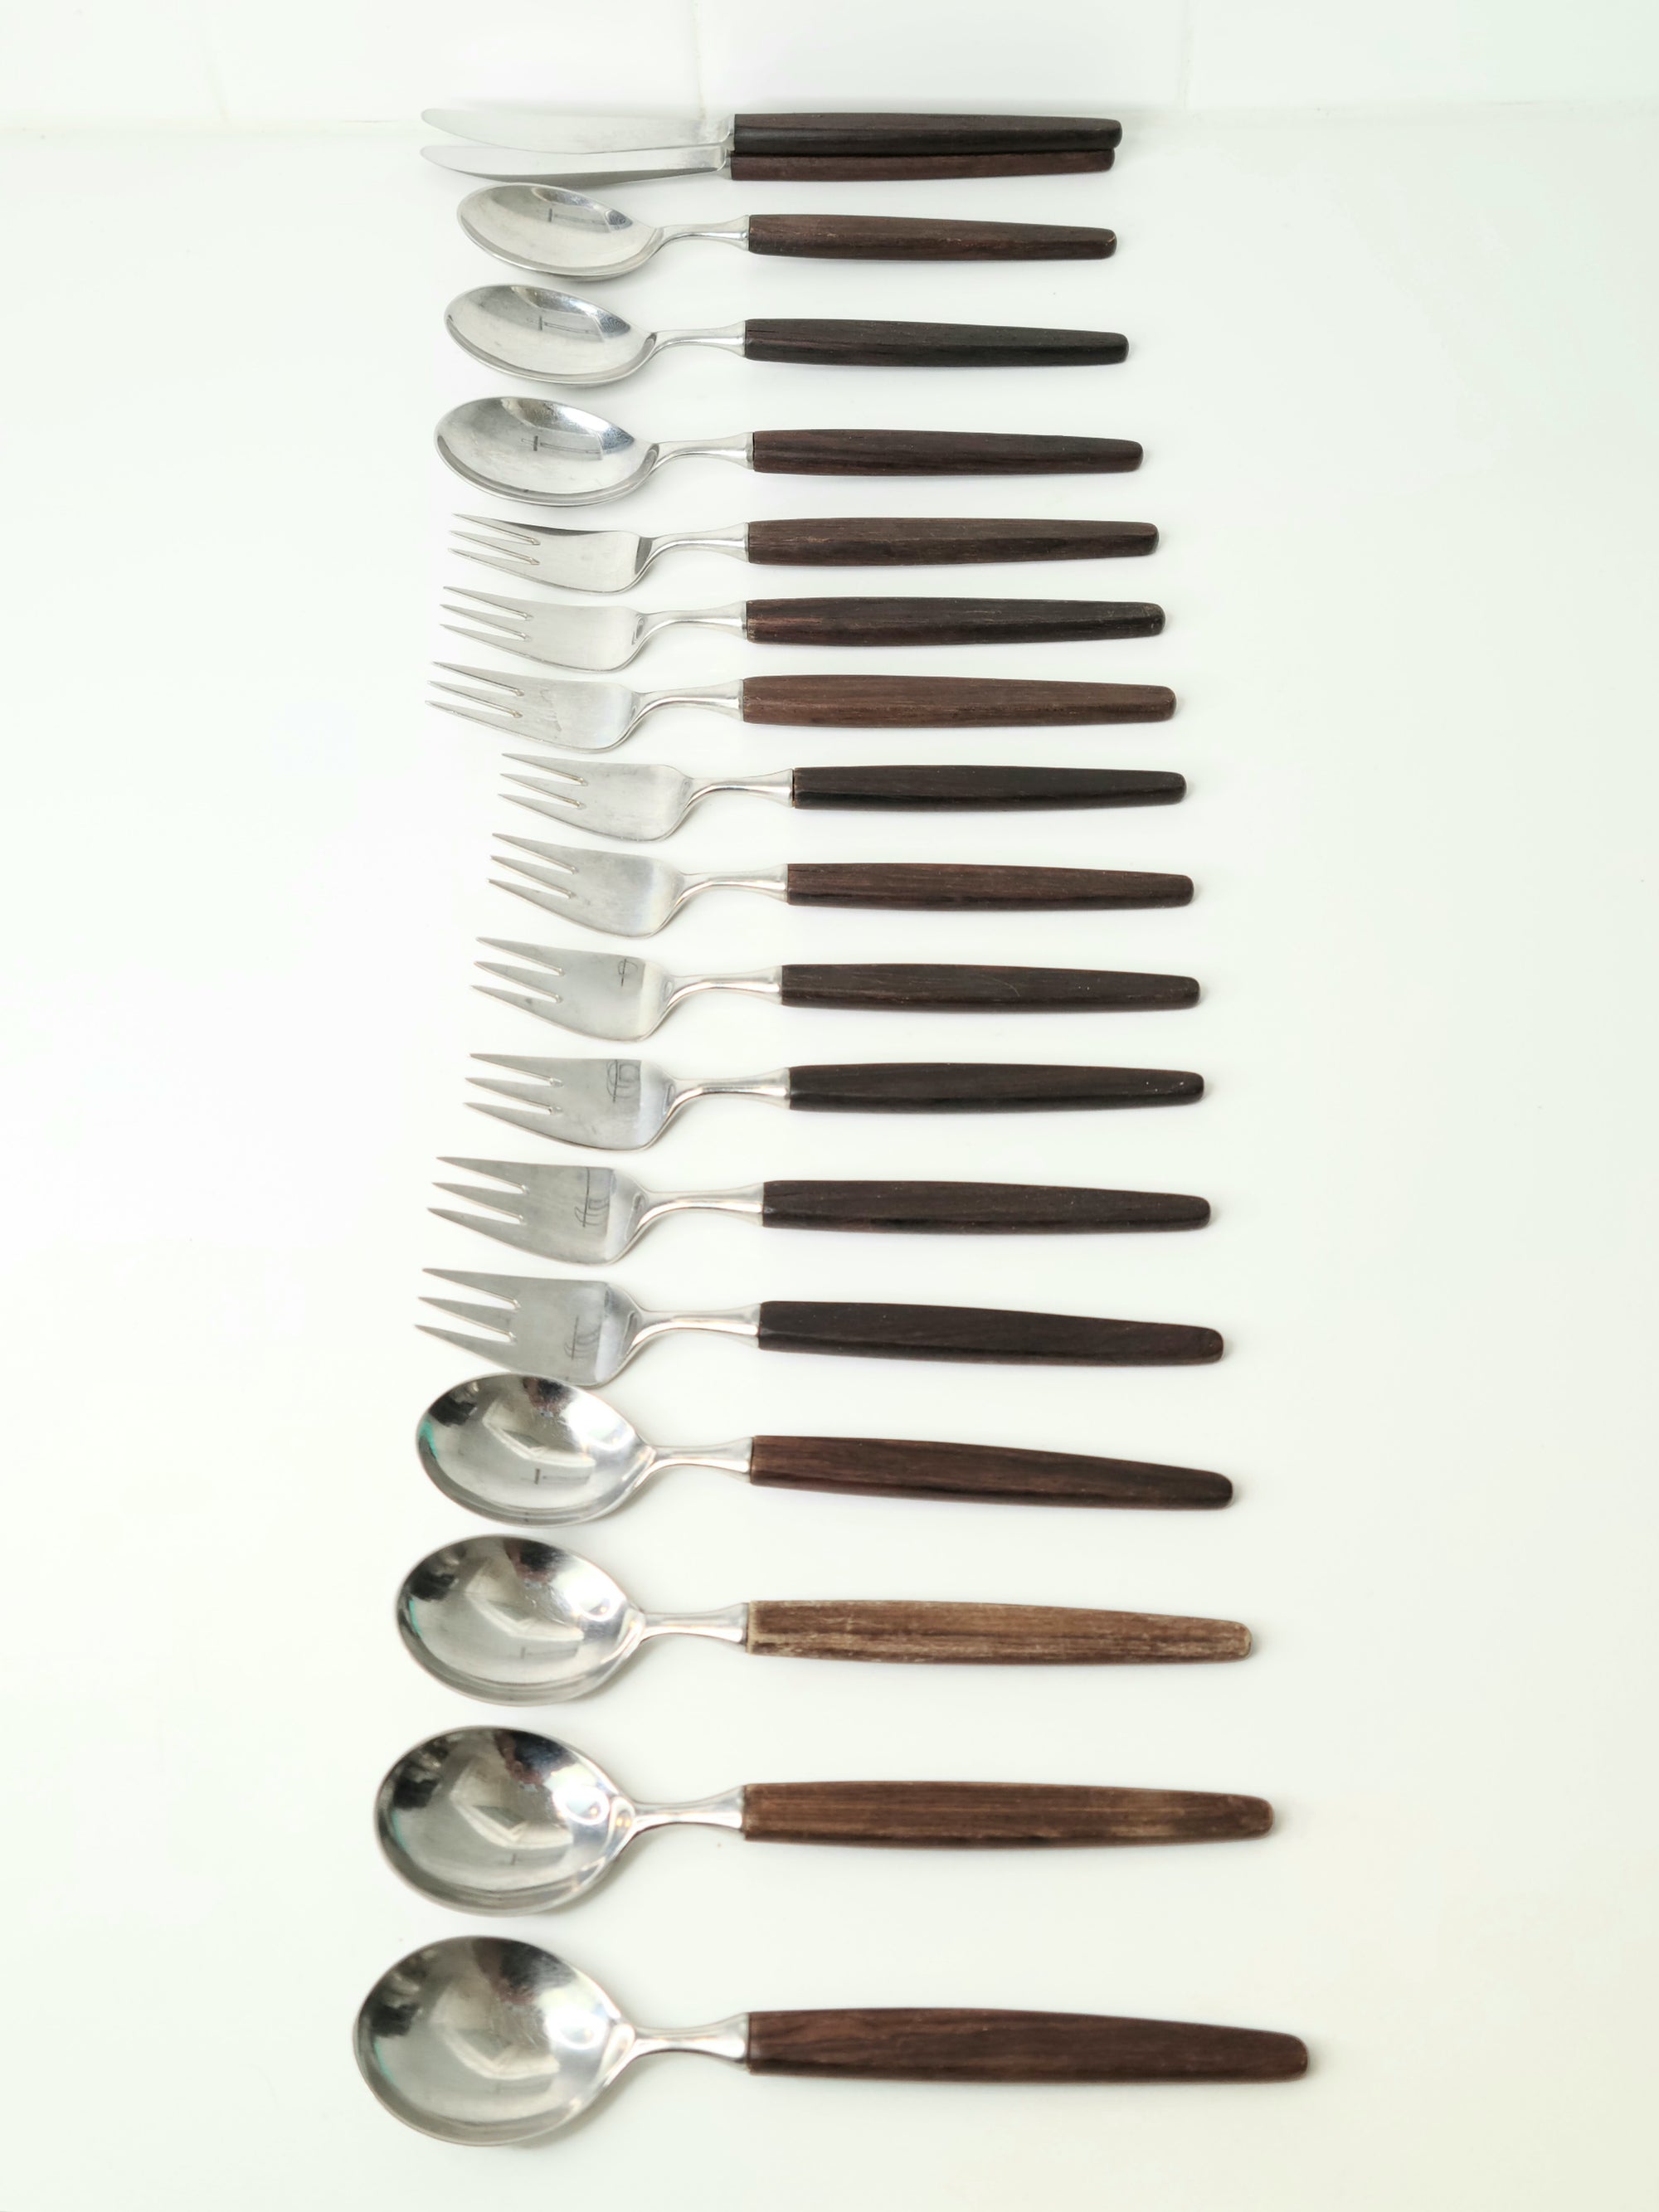 Tias Eckhoff Rosewood and Stainless Flatware